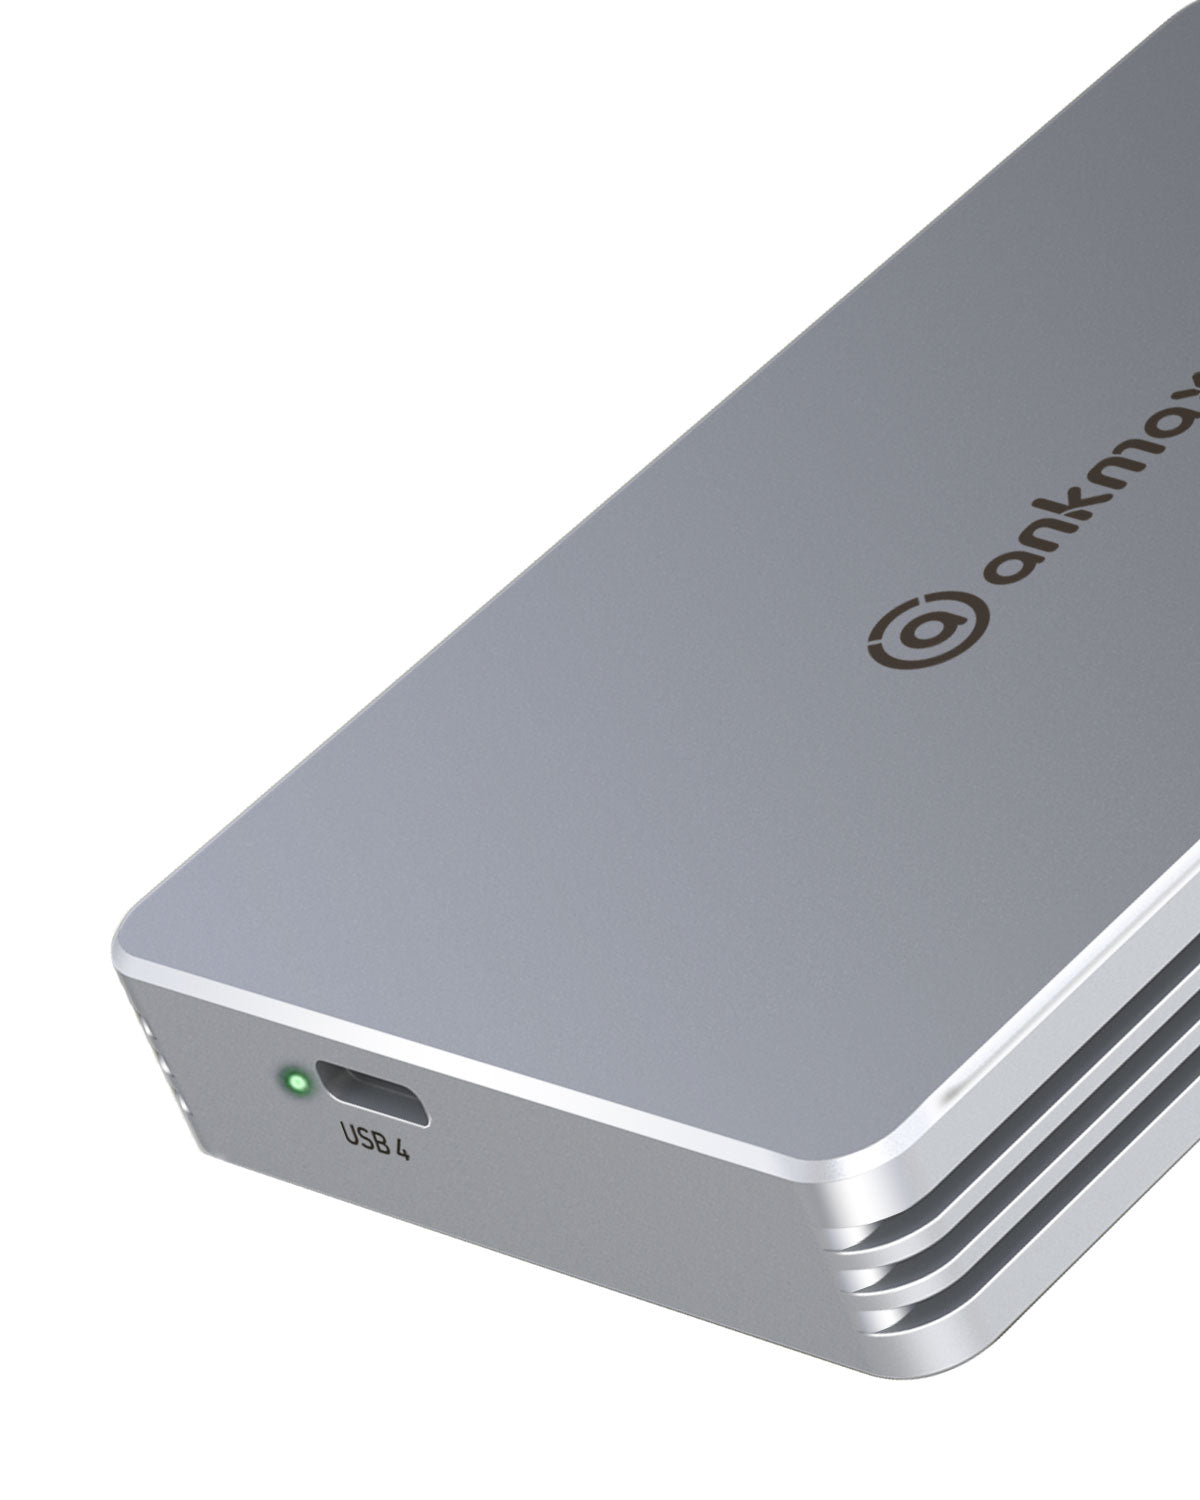 ANKMAX UC4M2 USB4 SSD Enclosure for NVMe M.2 SSD – Ankmax Official